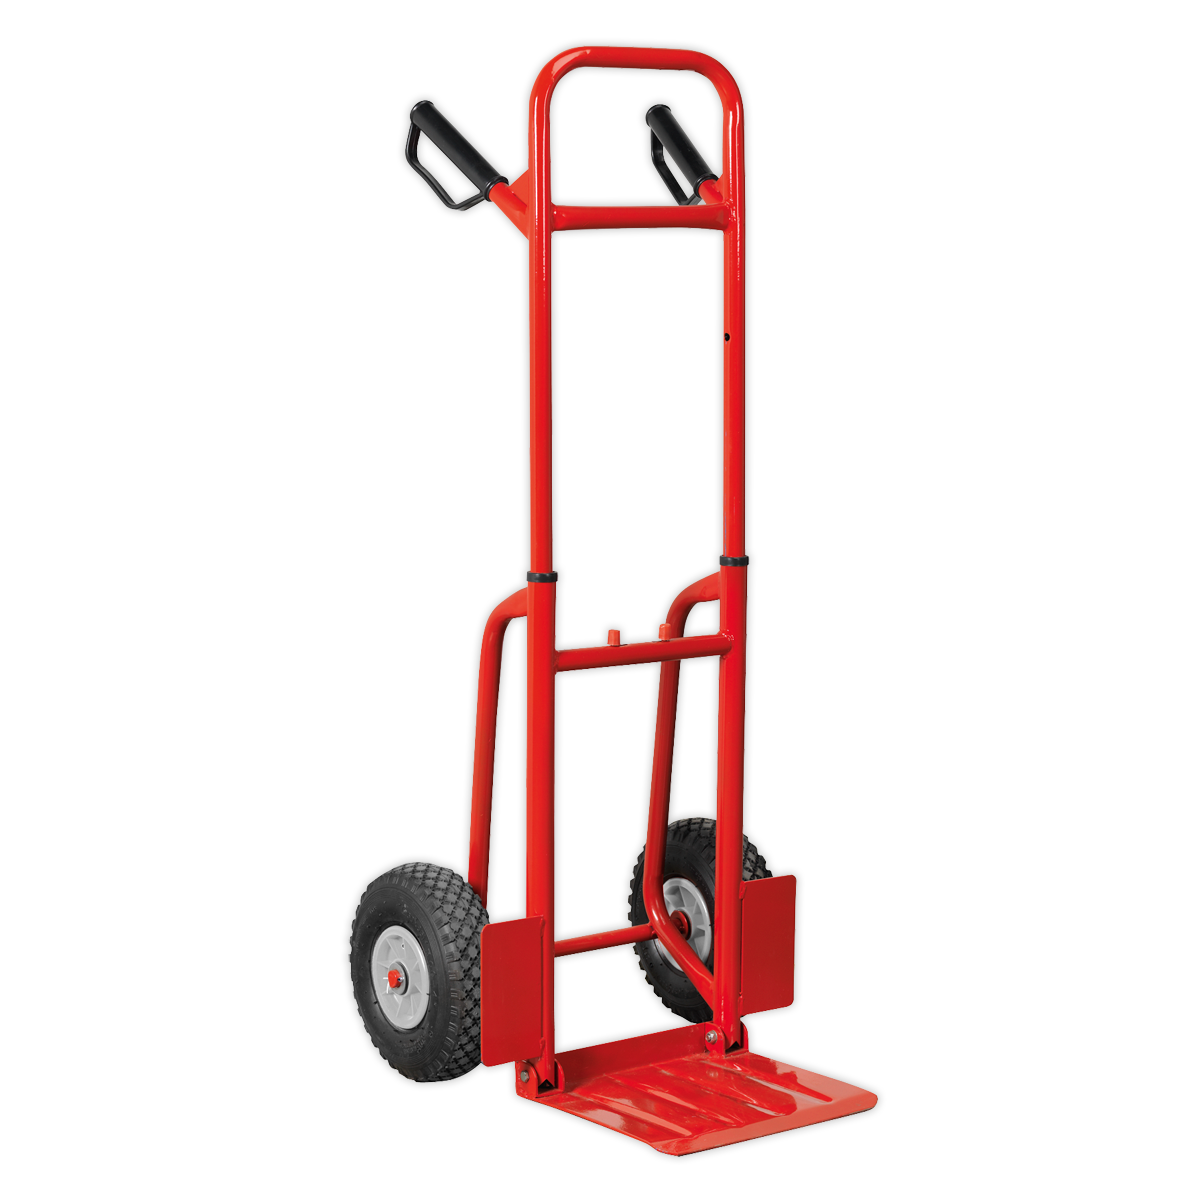 Sealey Sack Truck with Pneumatic Tyres 200kg Folding